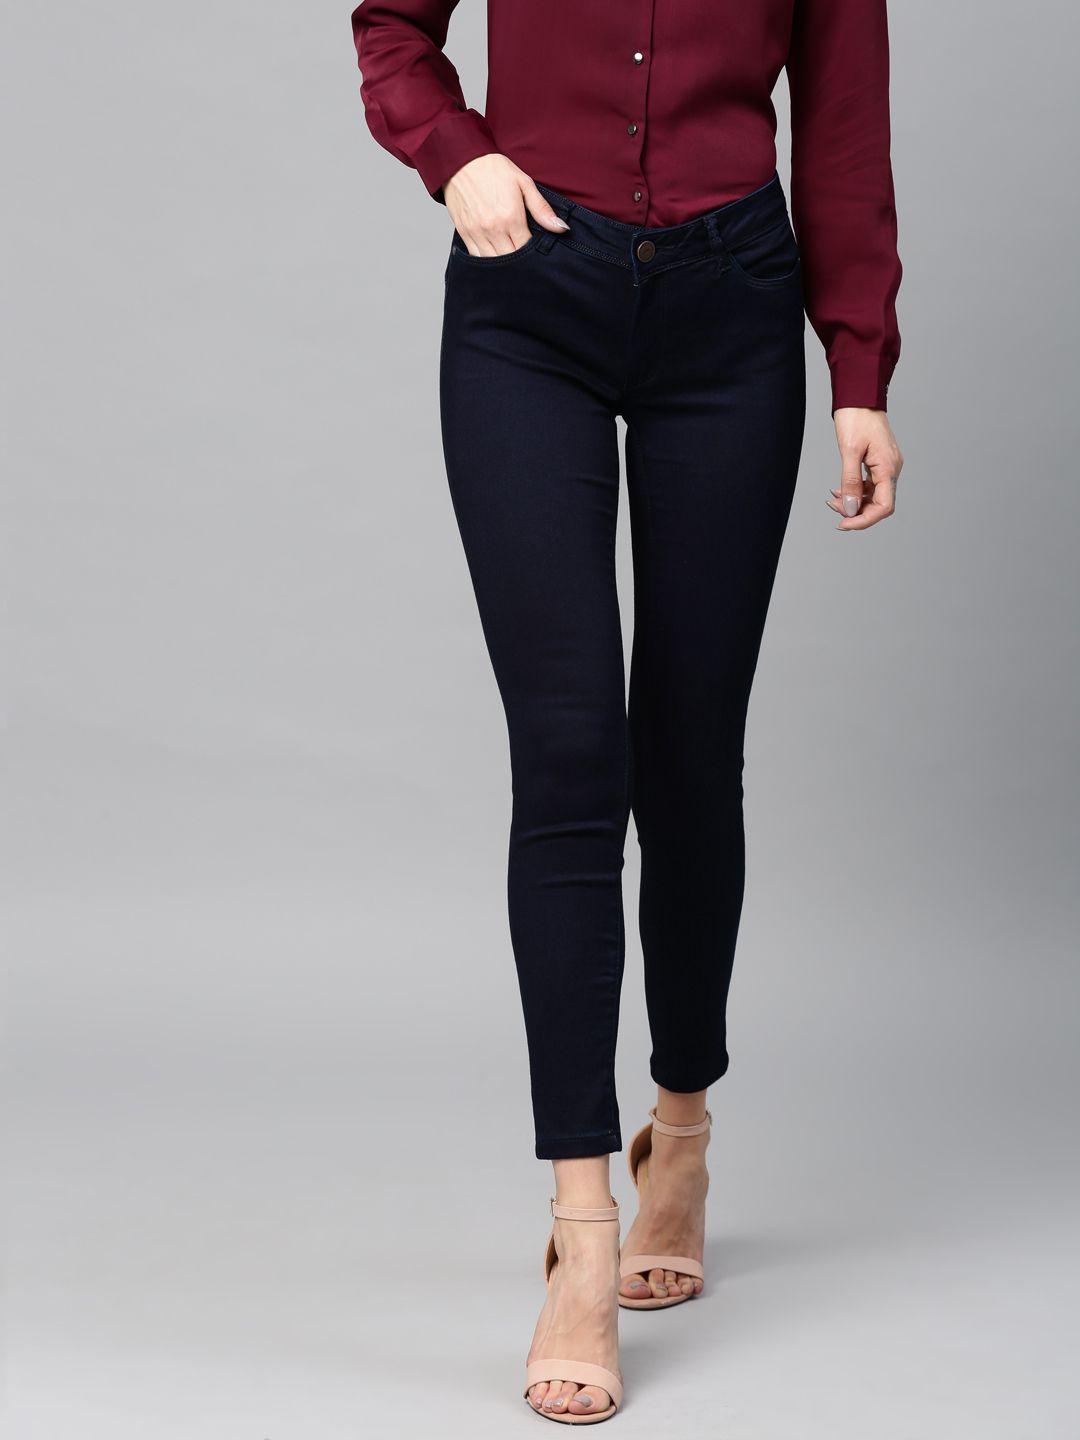 tokyo-talkies-women-navy-blue-skinny-fit-mid-rise-clean-look-stretchable-jeans